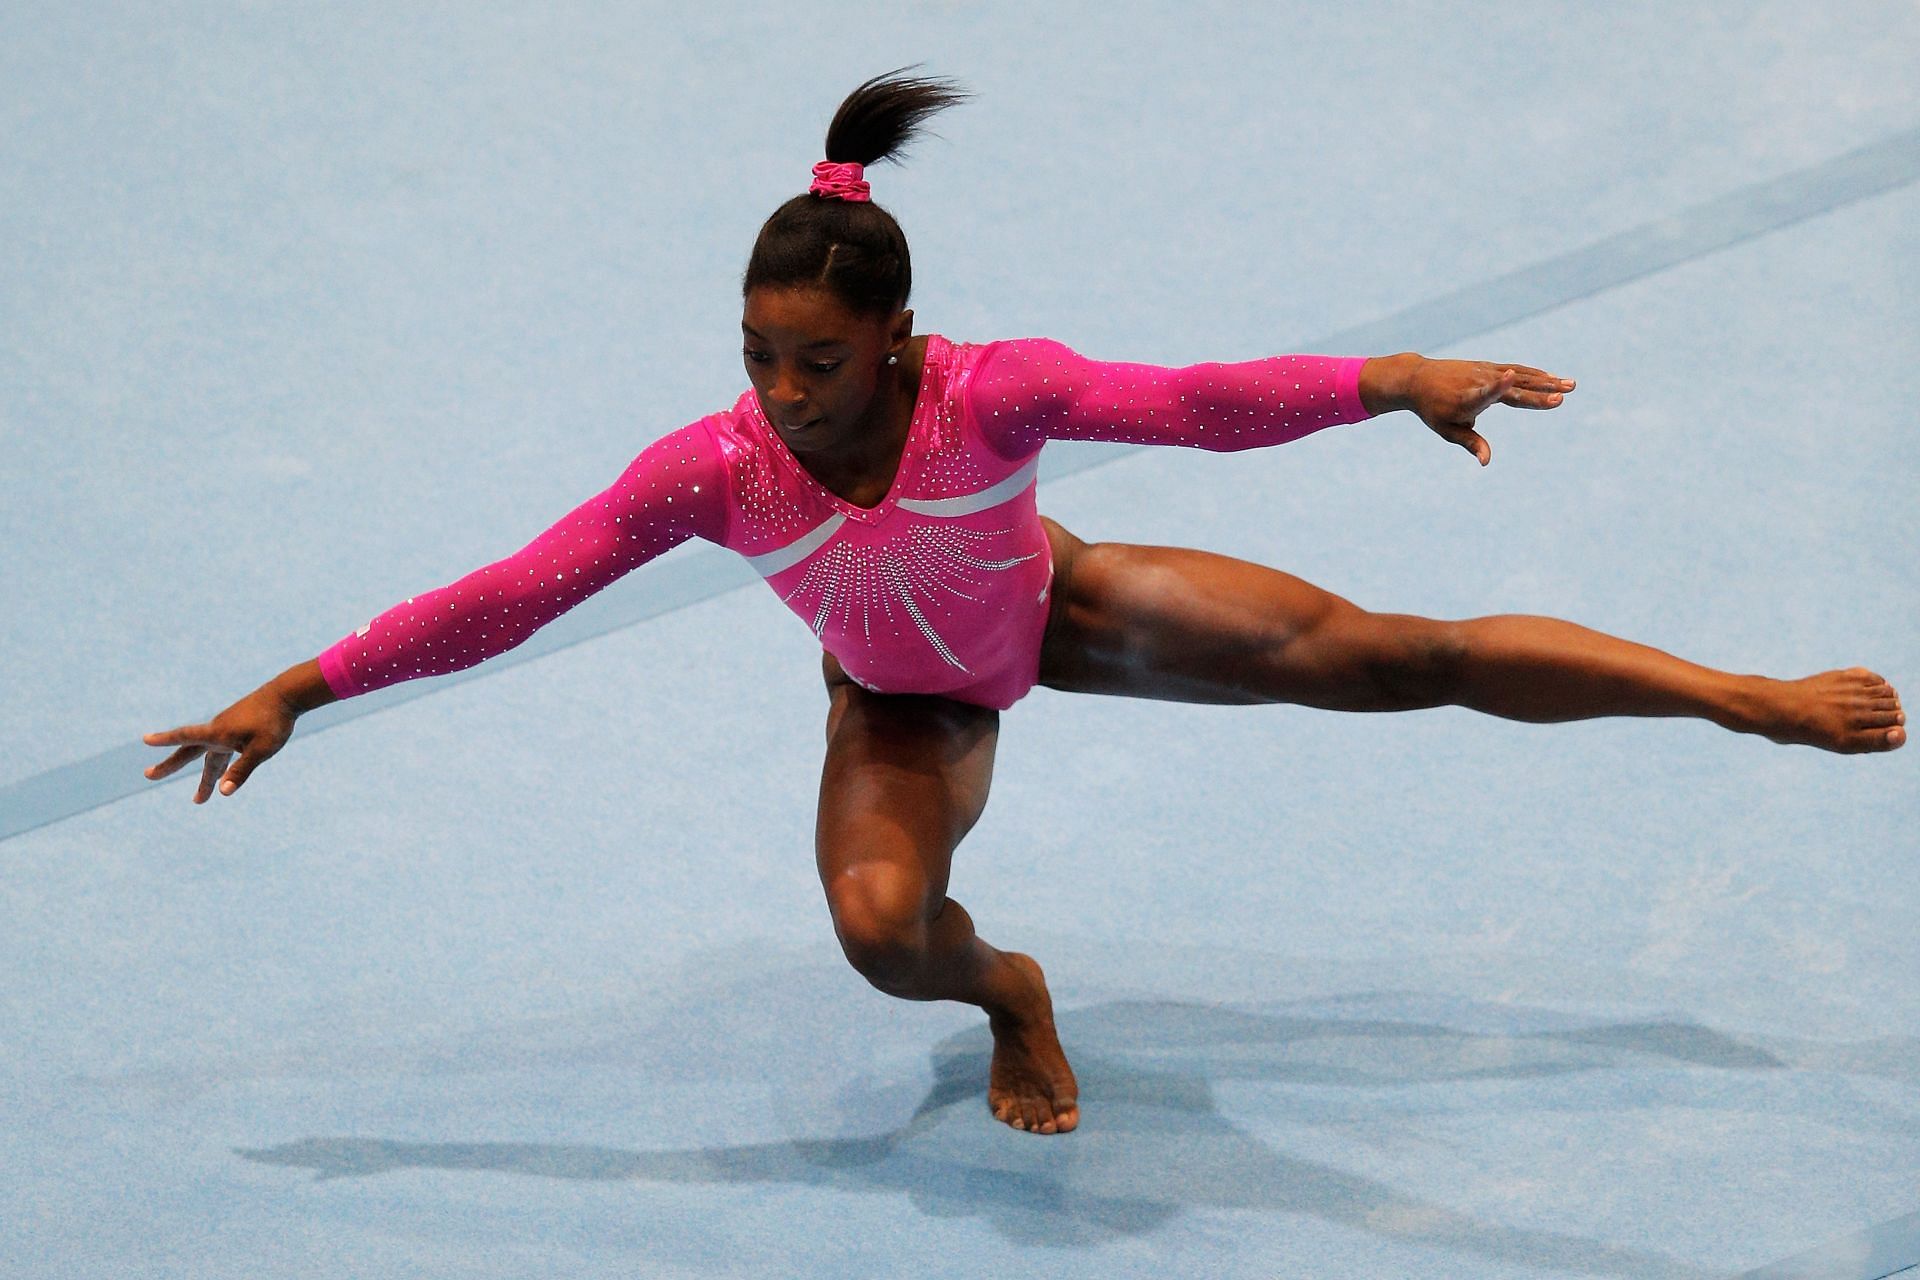 Simone Biles competes in the floor exercise during the 2013 Artistic Gymnastics World Championships in Antwerp, Belgium